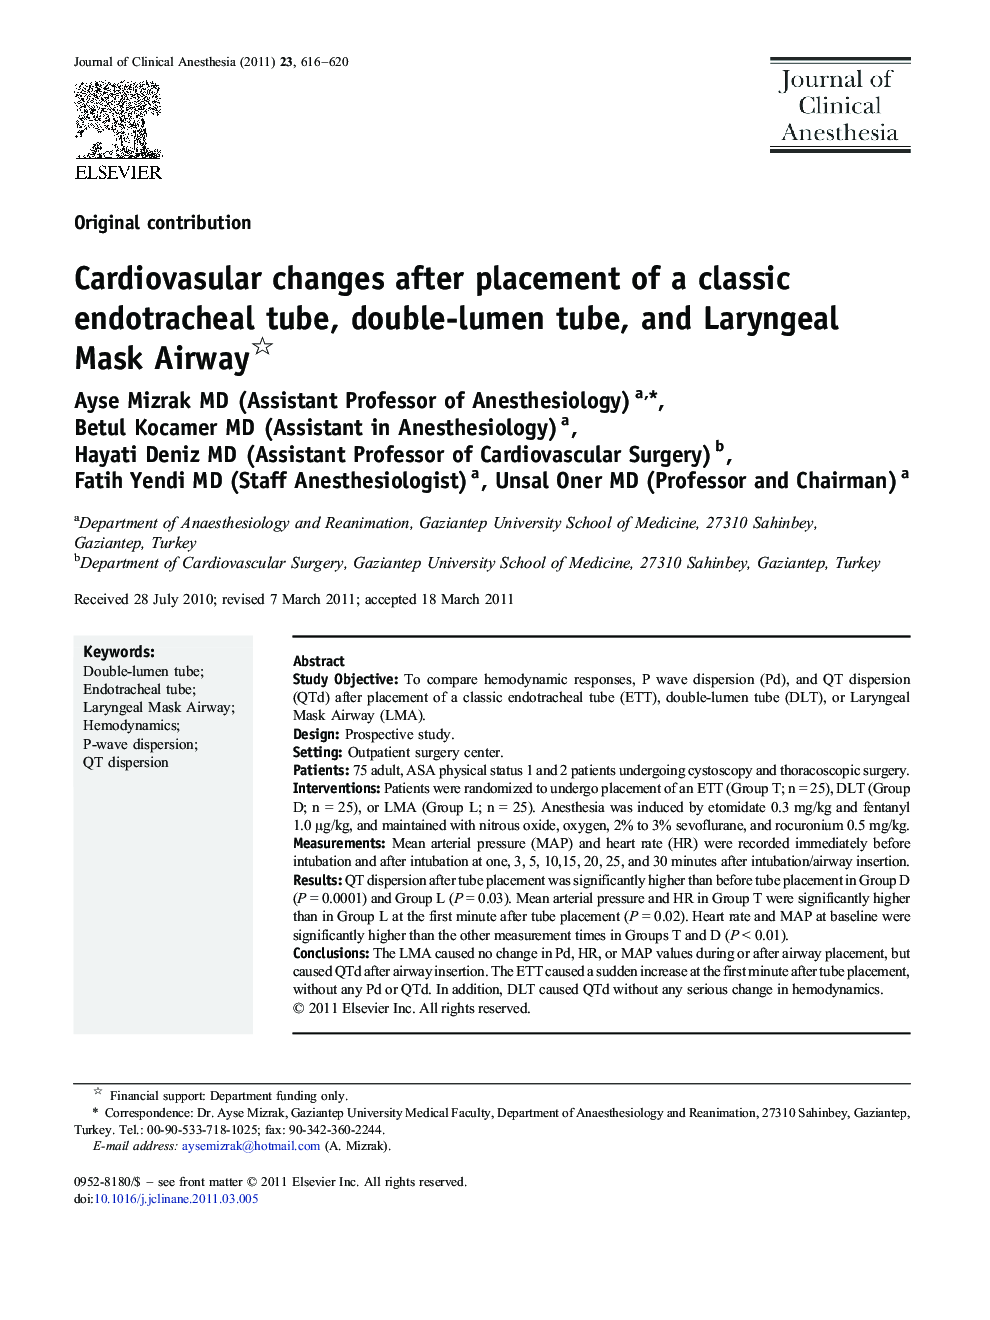 Cardiovasular changes after placement of a classic endotracheal tube, double-lumen tube, and Laryngeal Mask Airway 